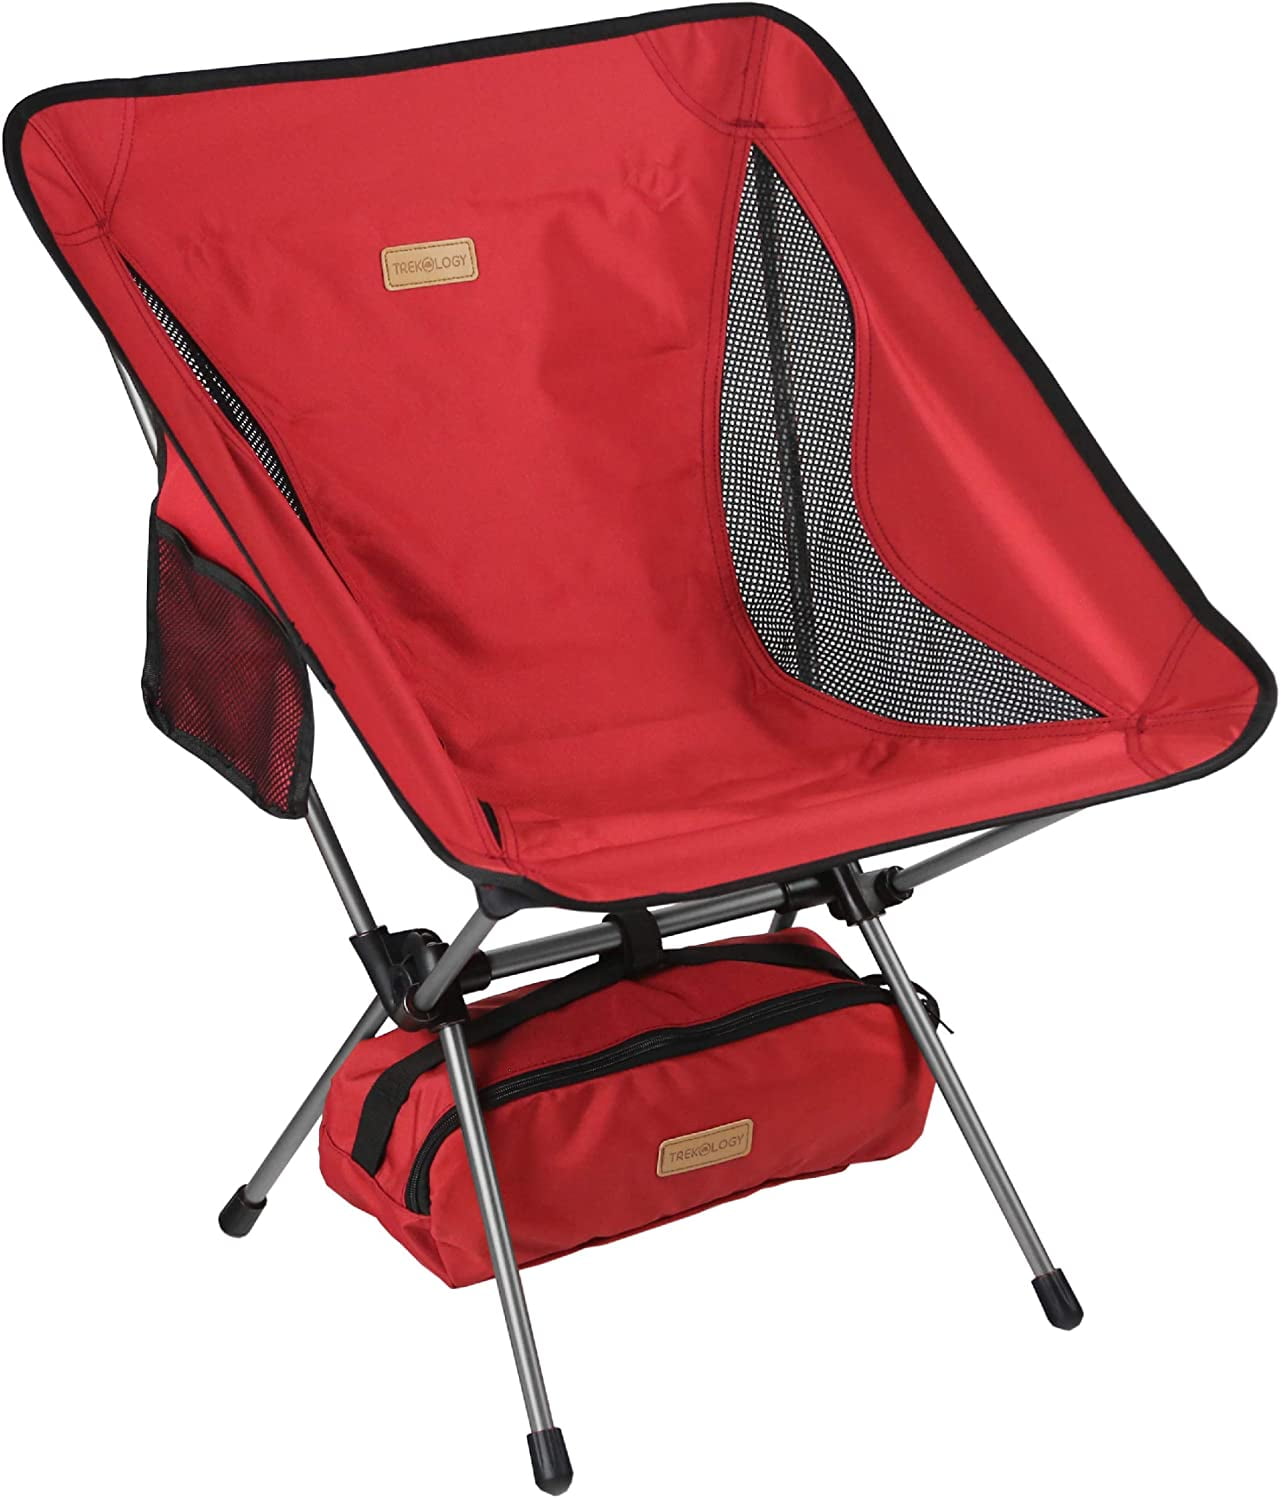 Hiking Picnic Camp Compact Ultralight Folding Backpacking Chairs Trekology YIZI GO Portable Camping Chair Small Collapsible Foldable Packable Lightweight Backpack Chair in a Bag for Outdoor